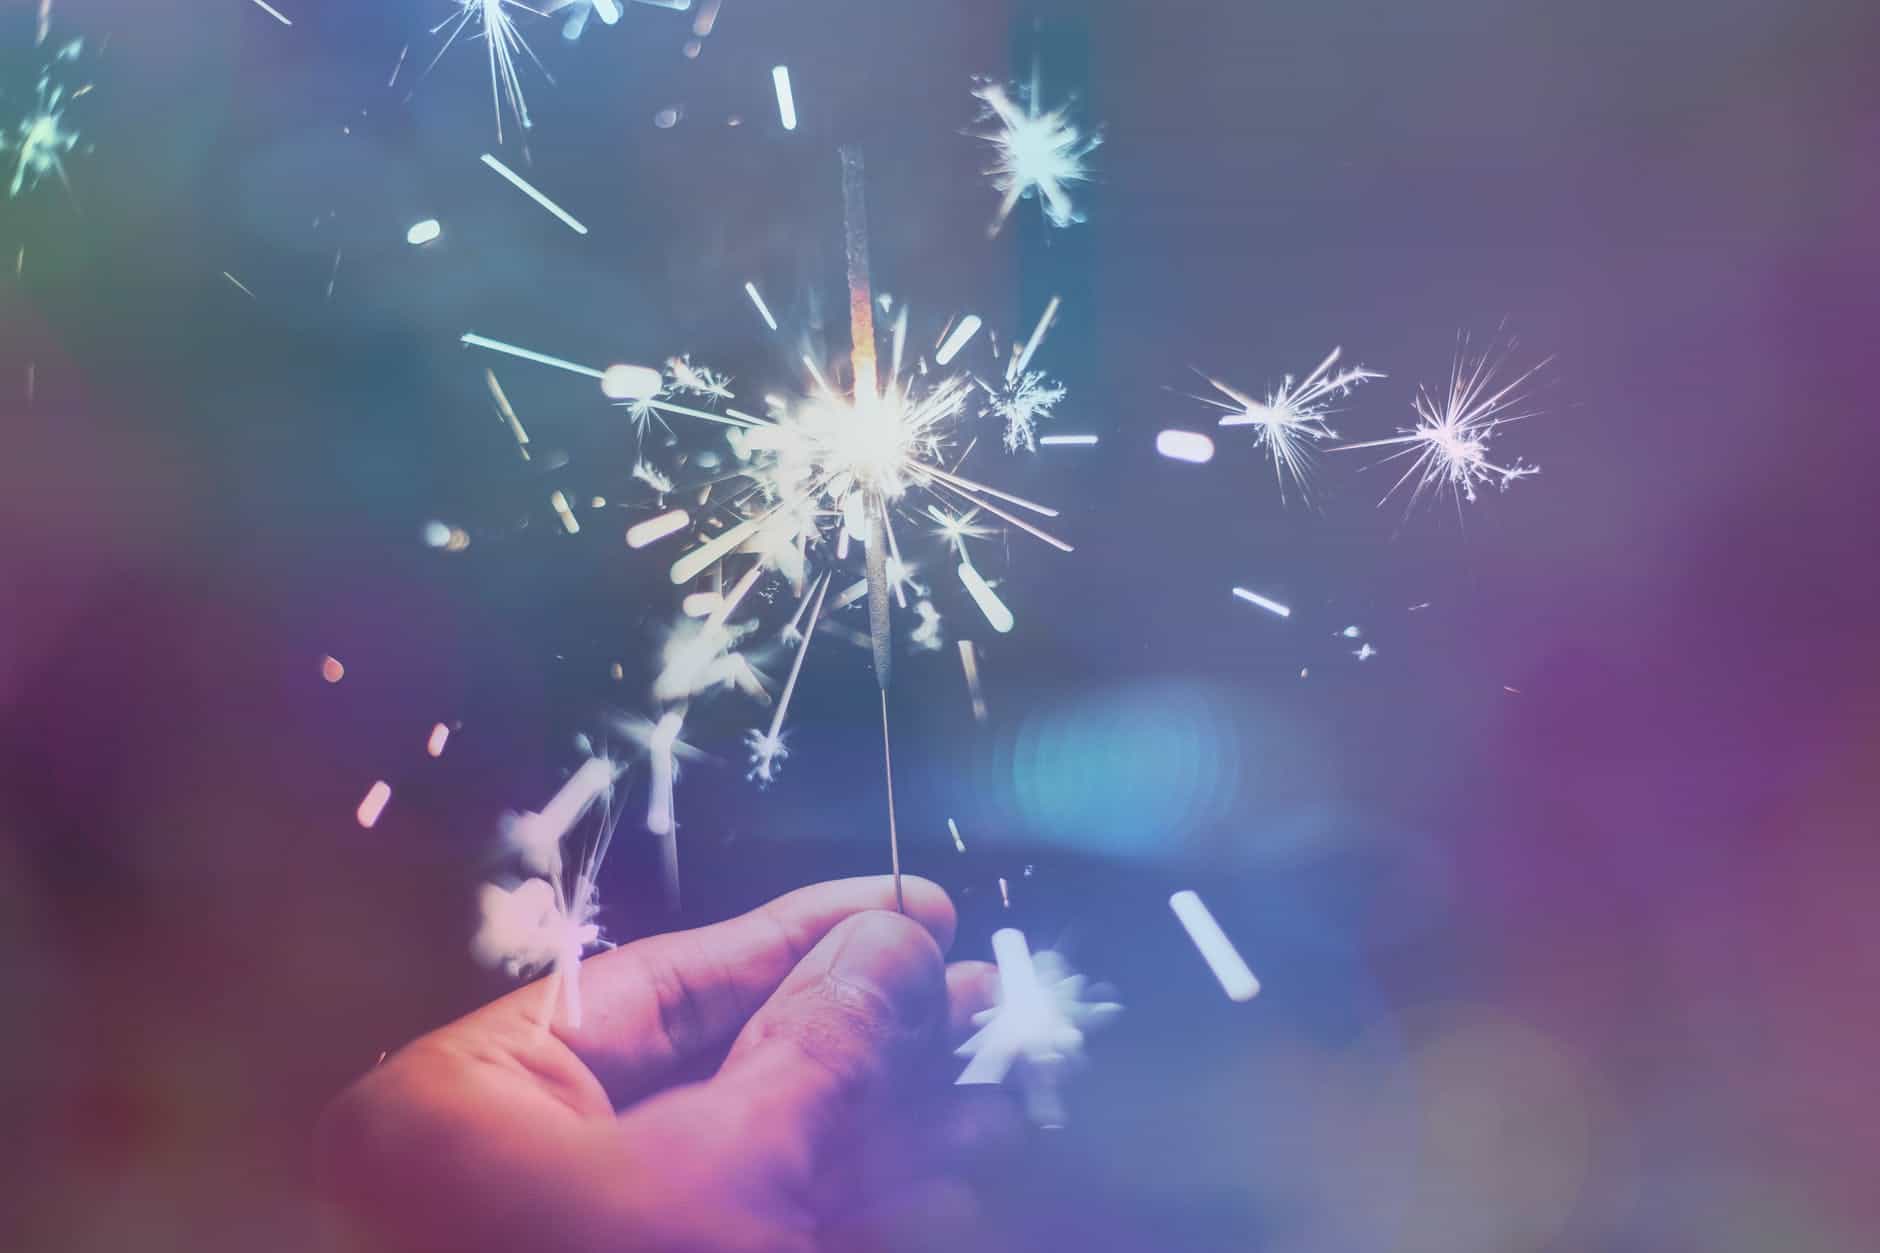 A hand holding a lit sparkler that is sparking brightly in the dark.